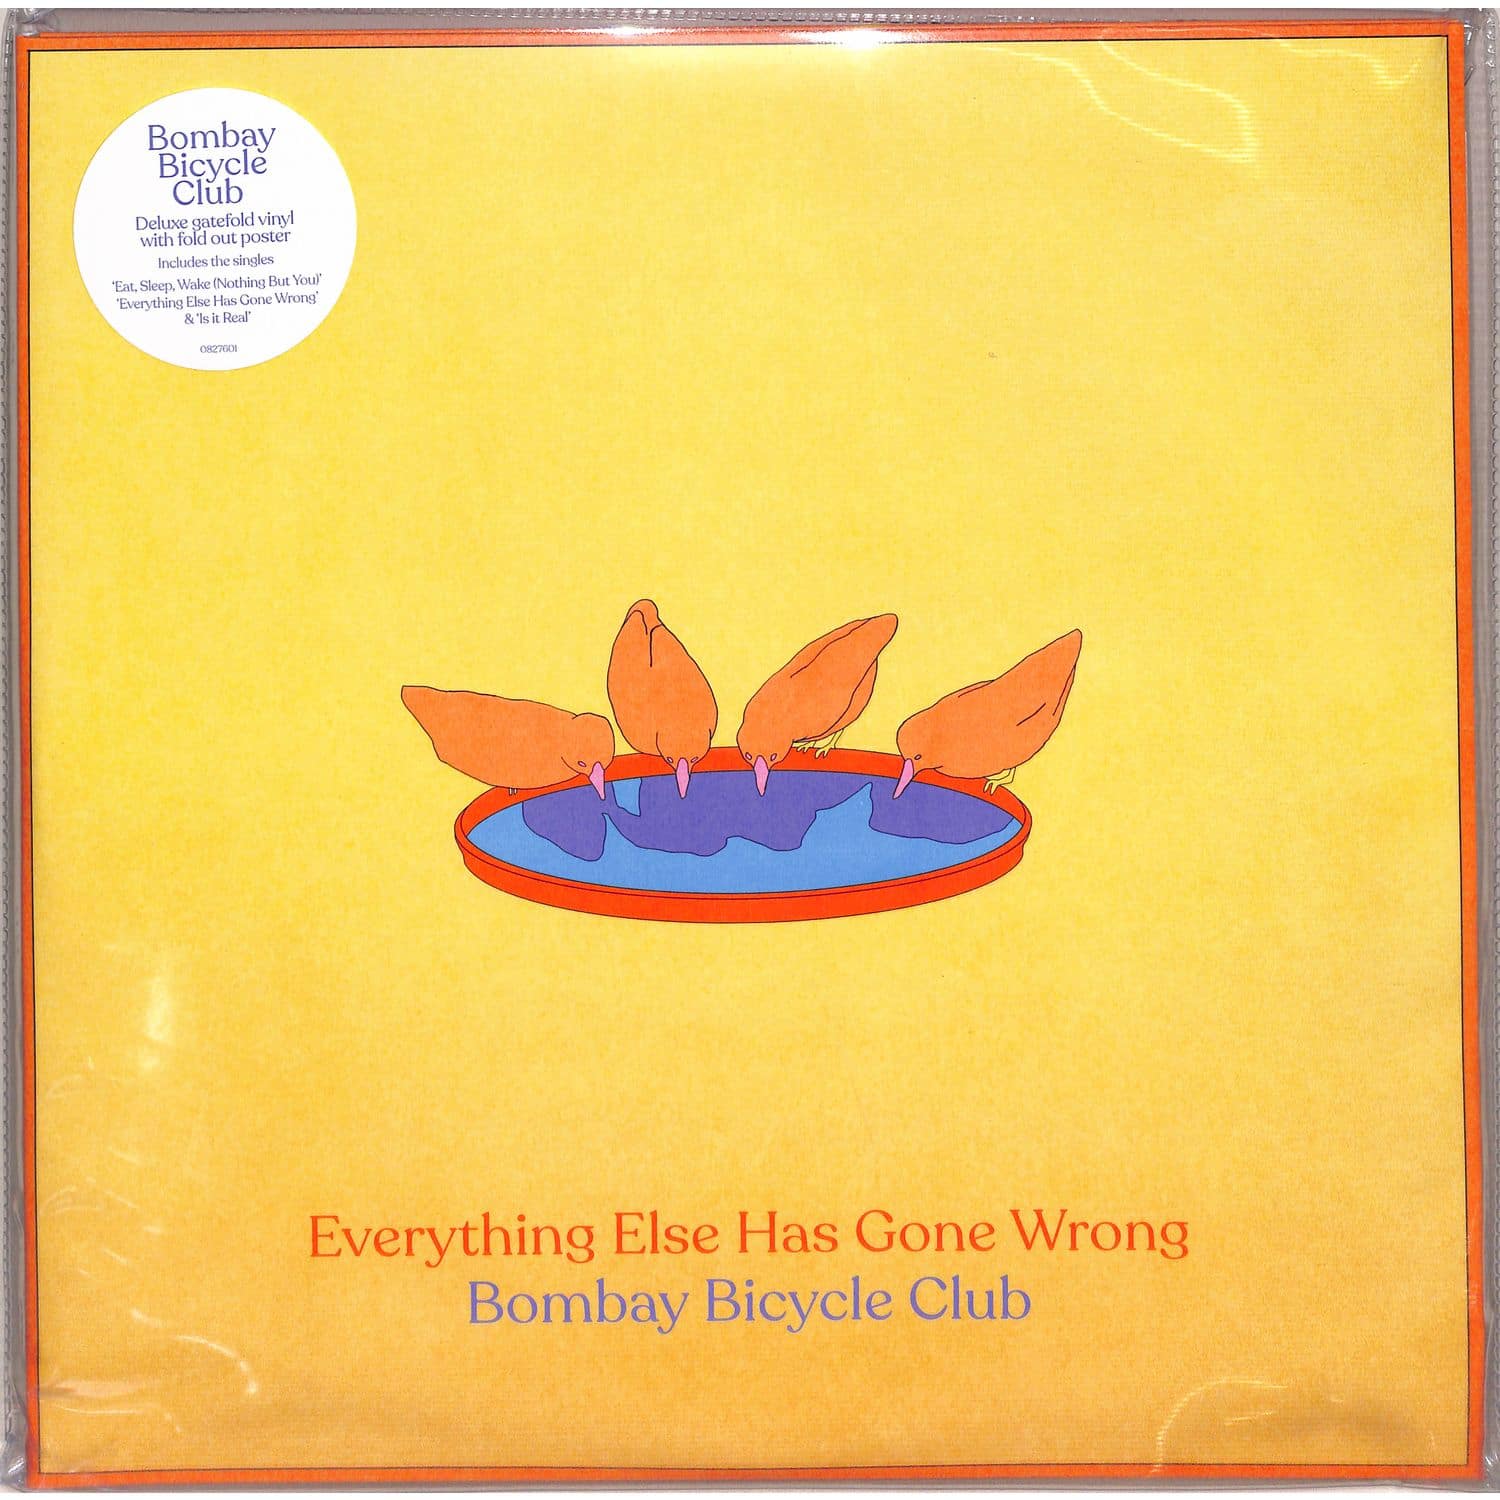 Bombay Bicycle Club - EVERYTHING ELSE HAS GONE WRONG 